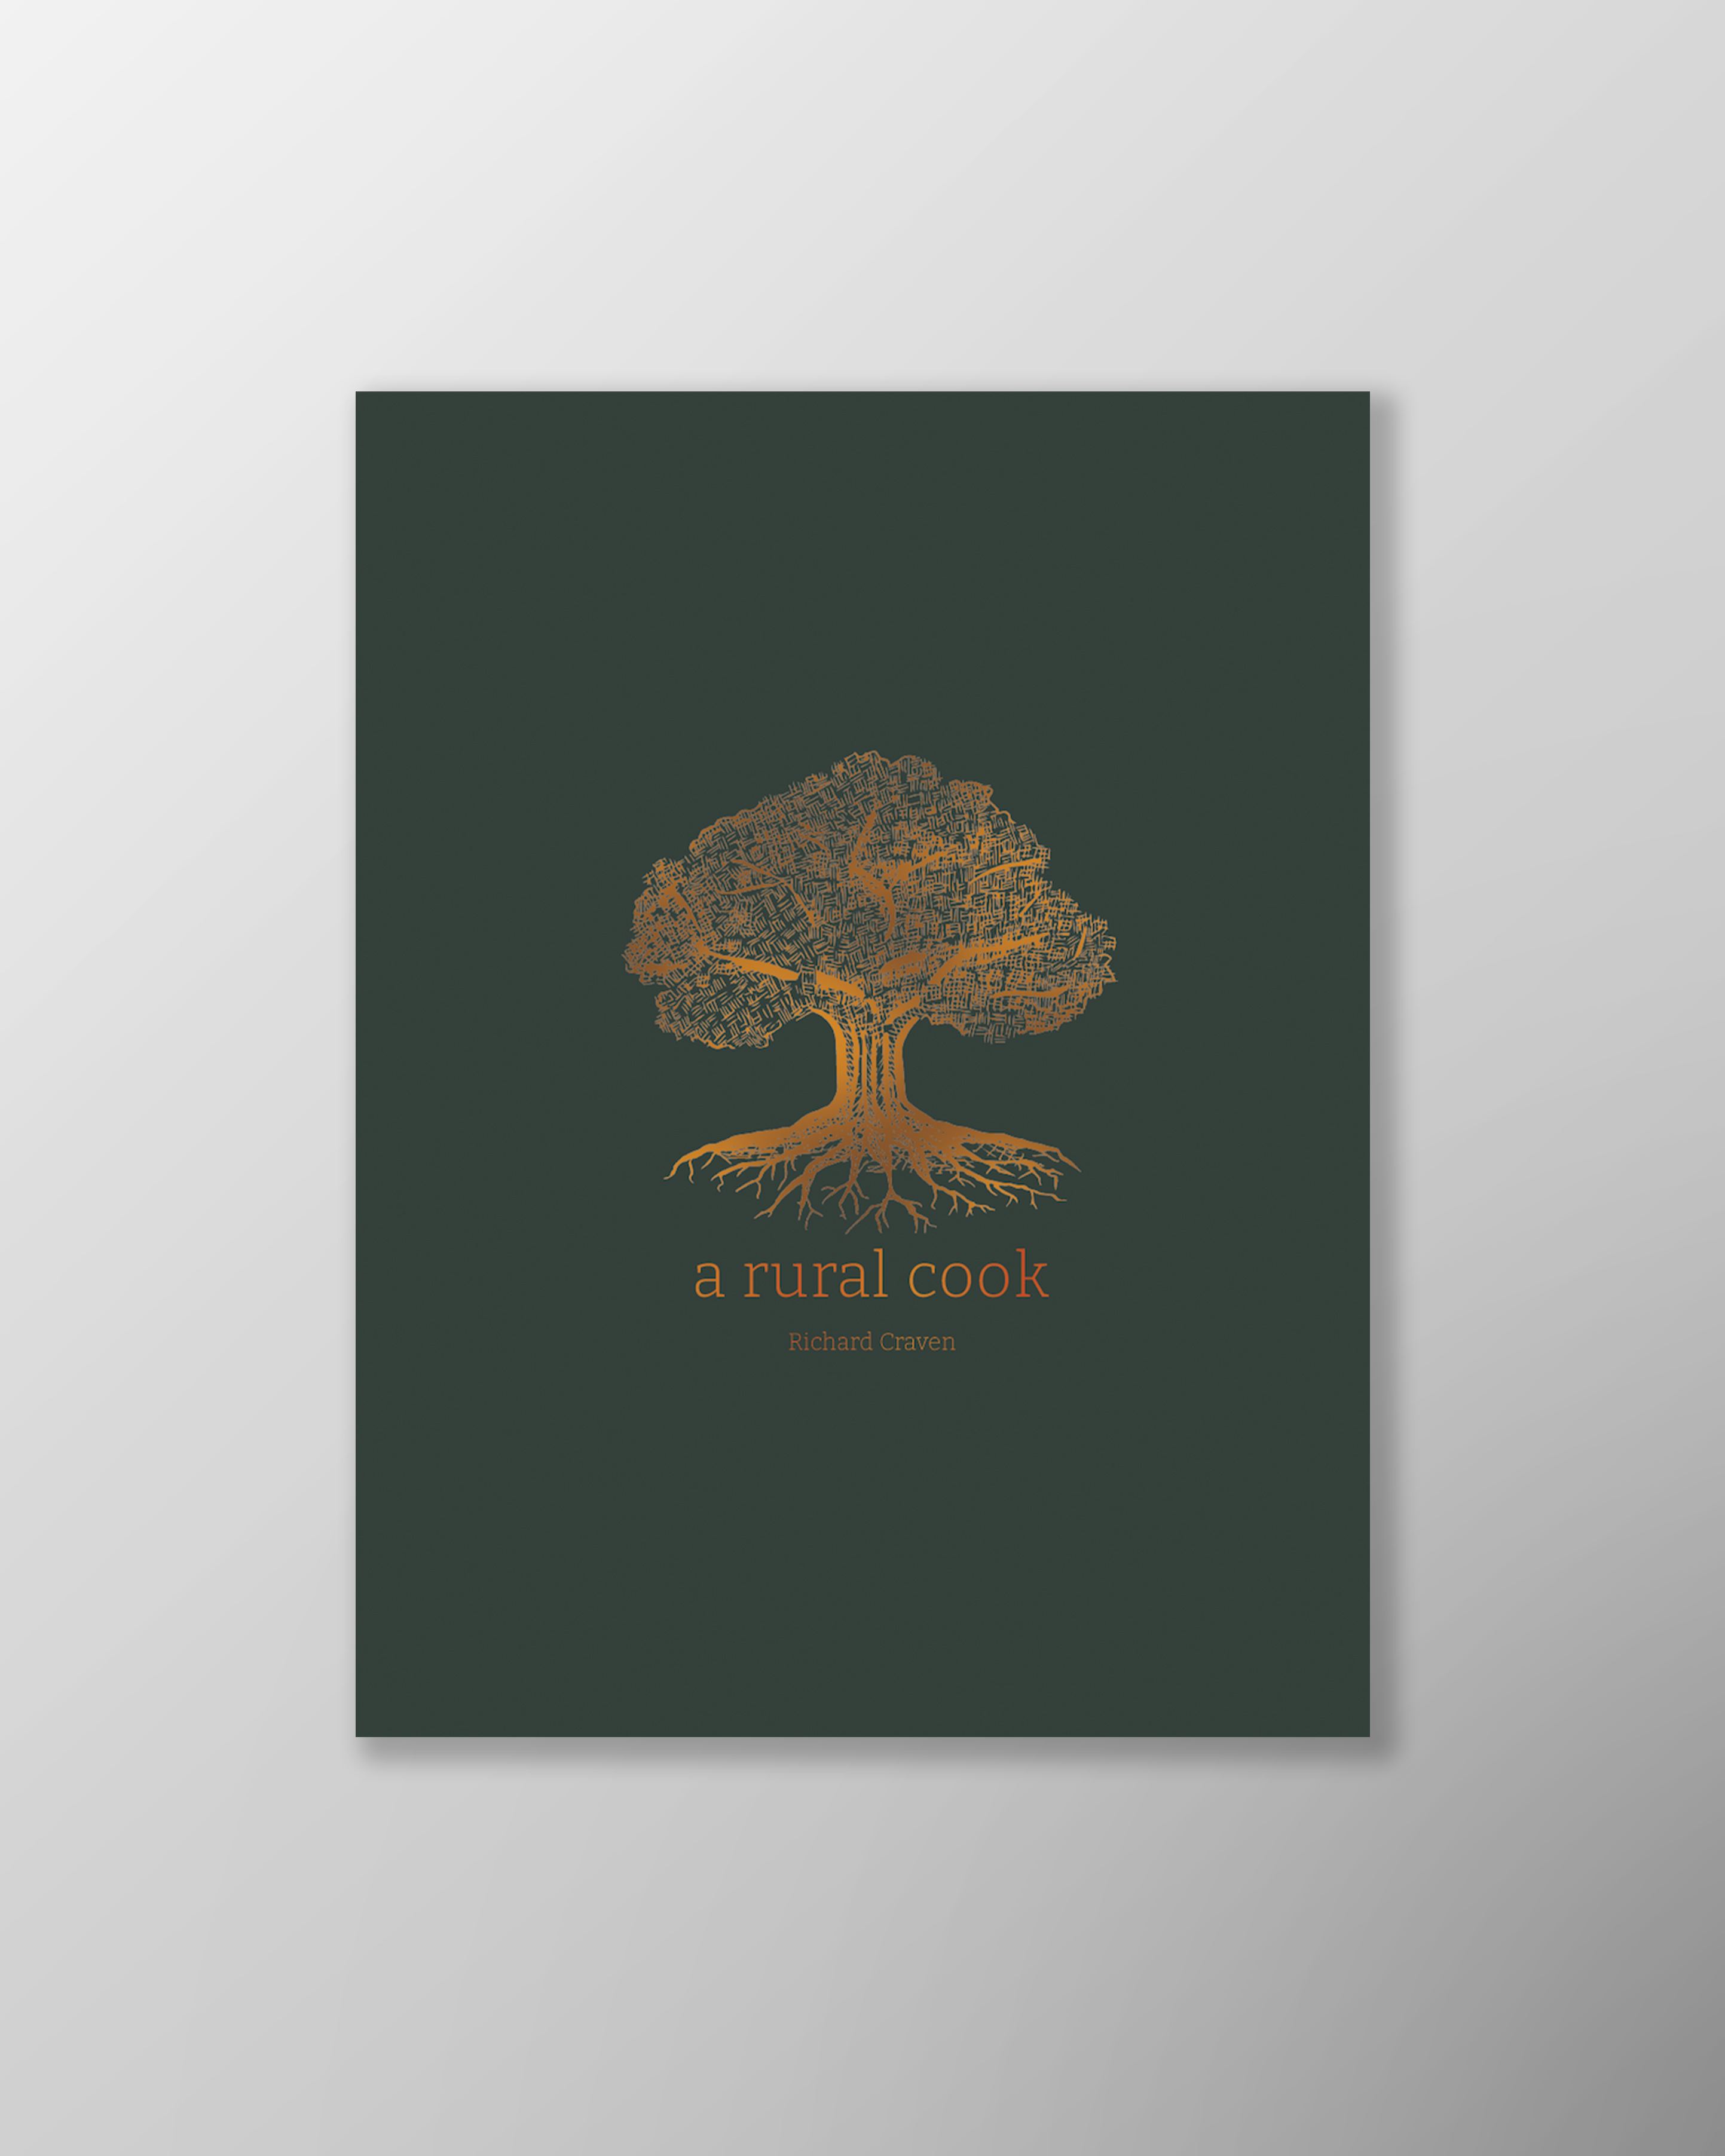 A Rural Cook by Richard Craven